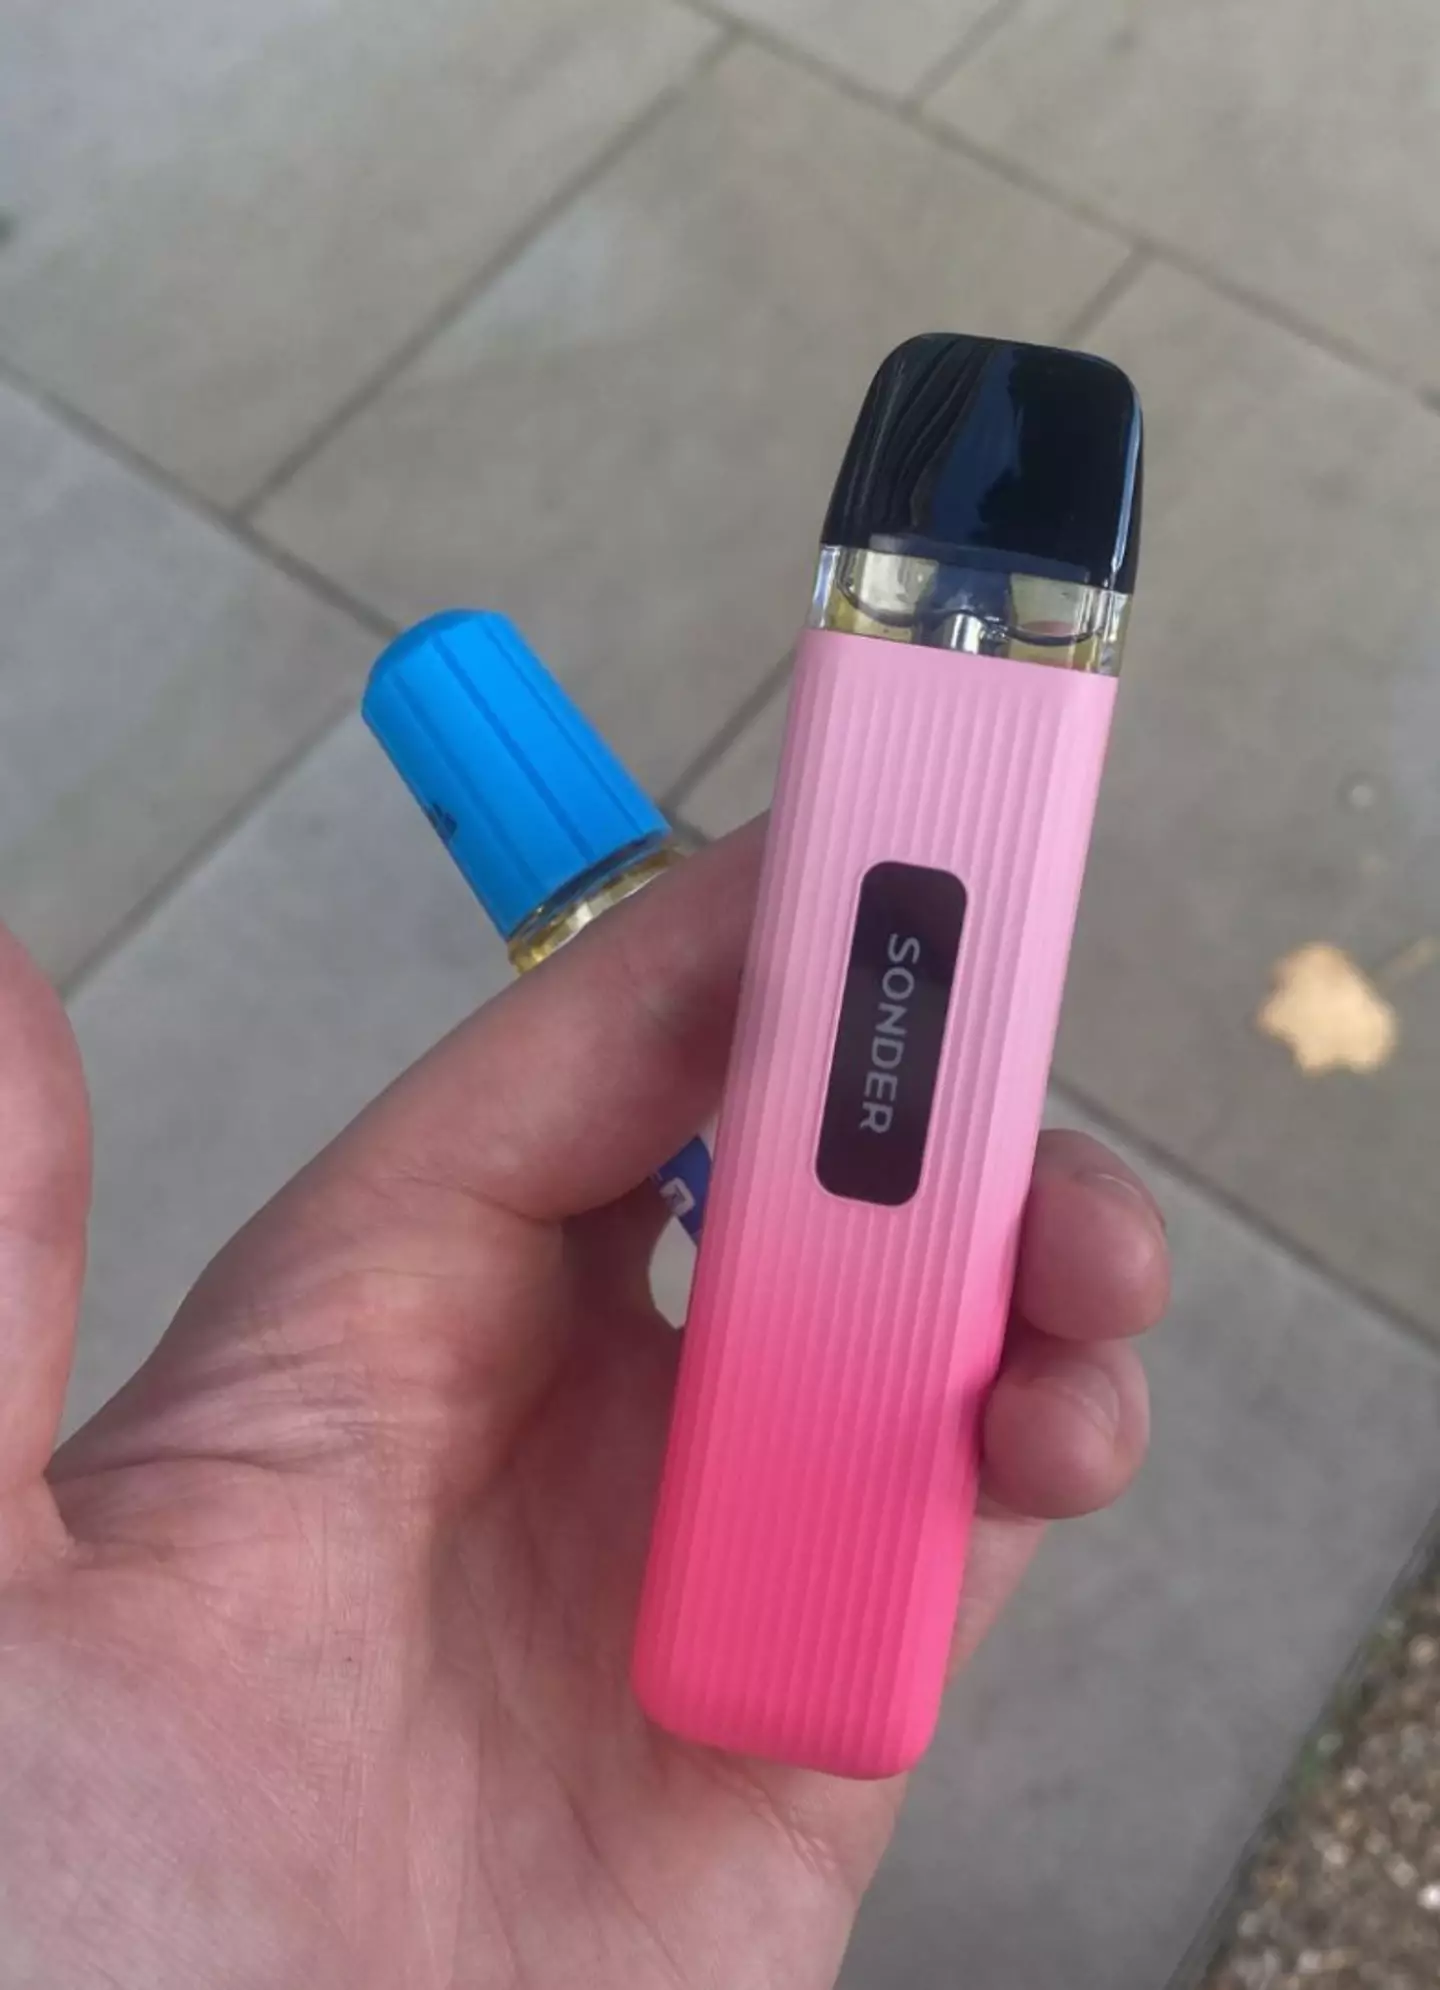 I ended up buying a reusable vape shortly before quitting because I felt guilty about what the disposables were doing to the environment.